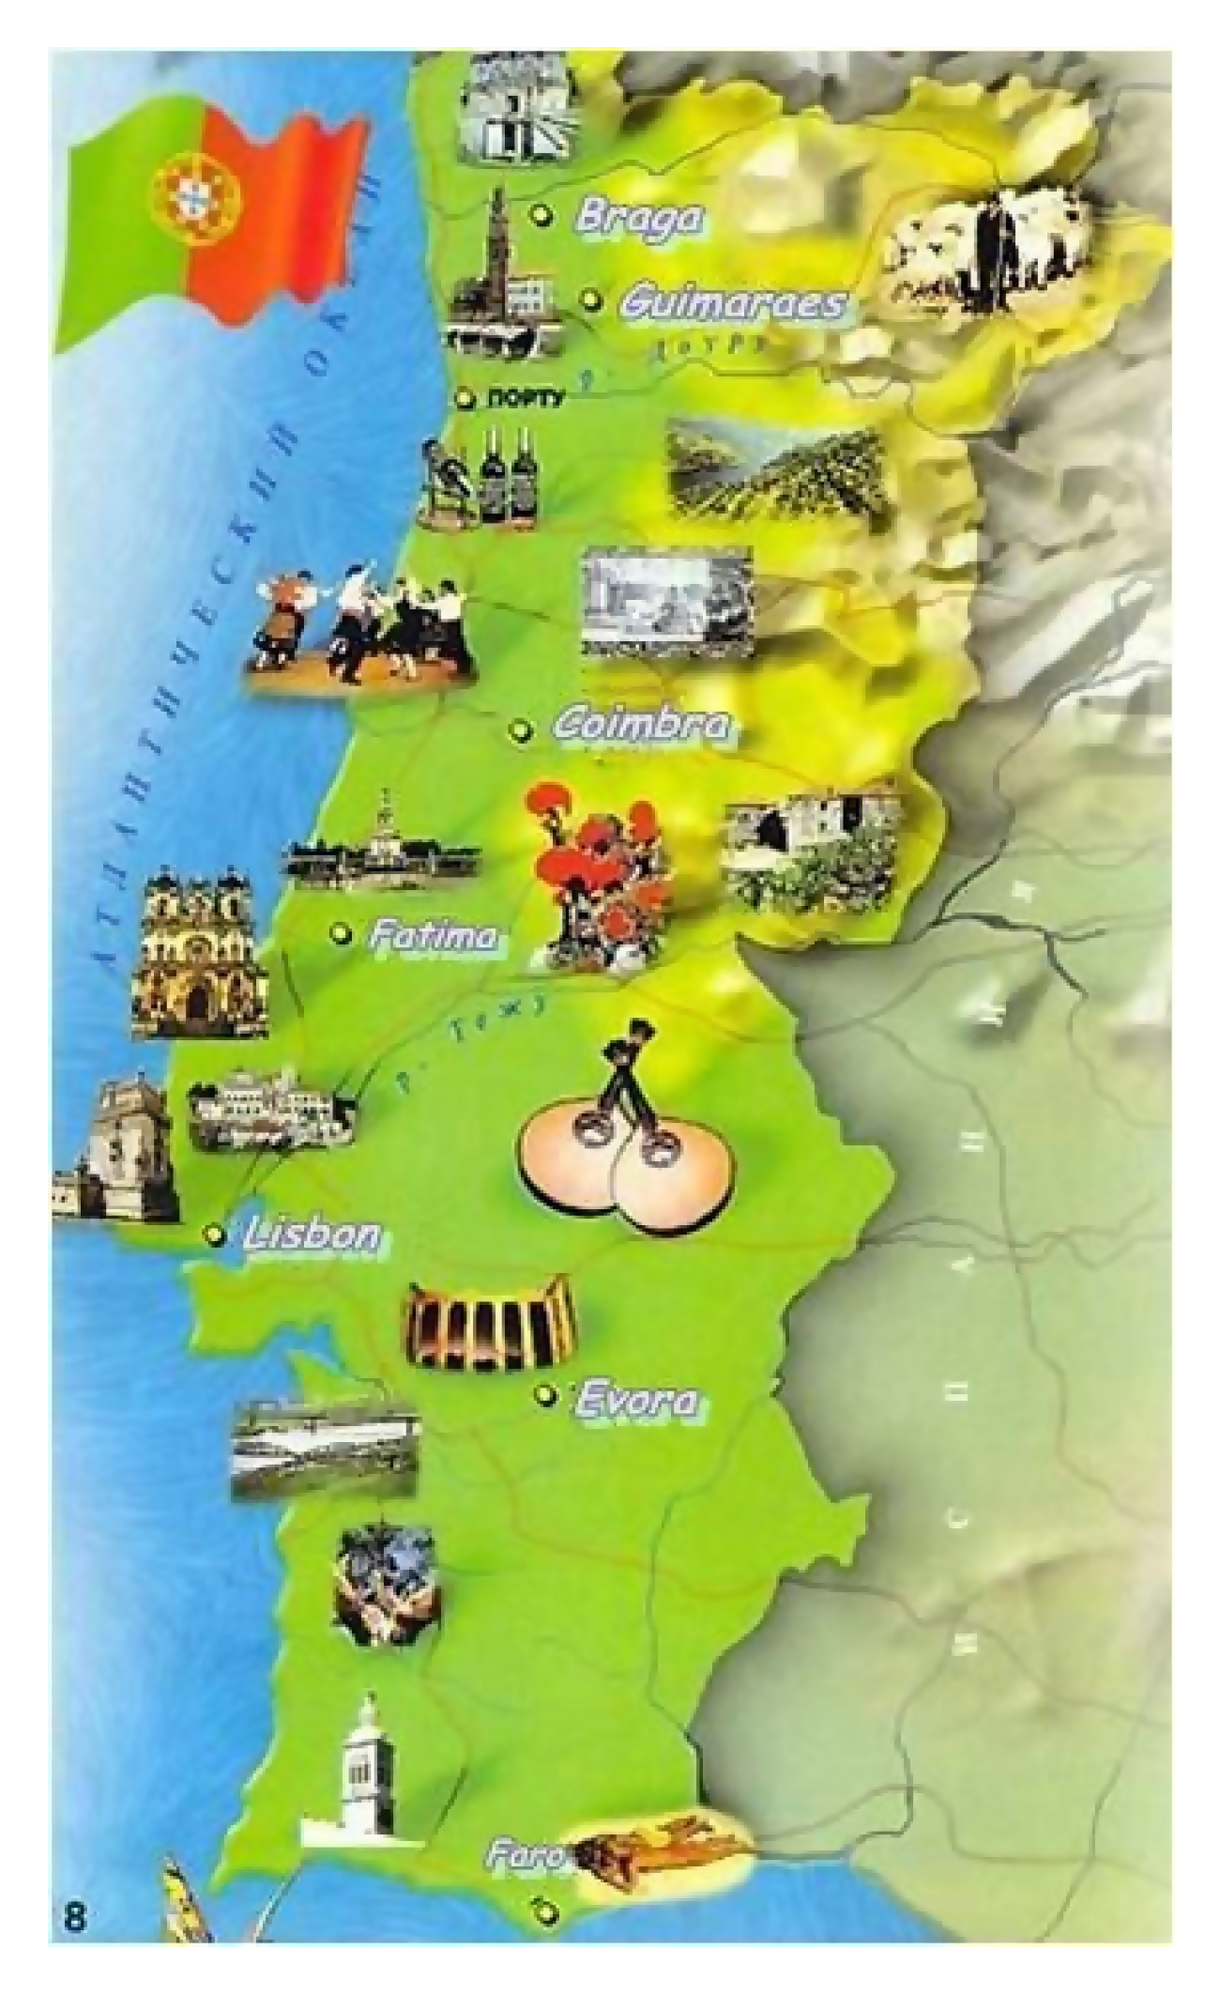 portugal tourist attractions map